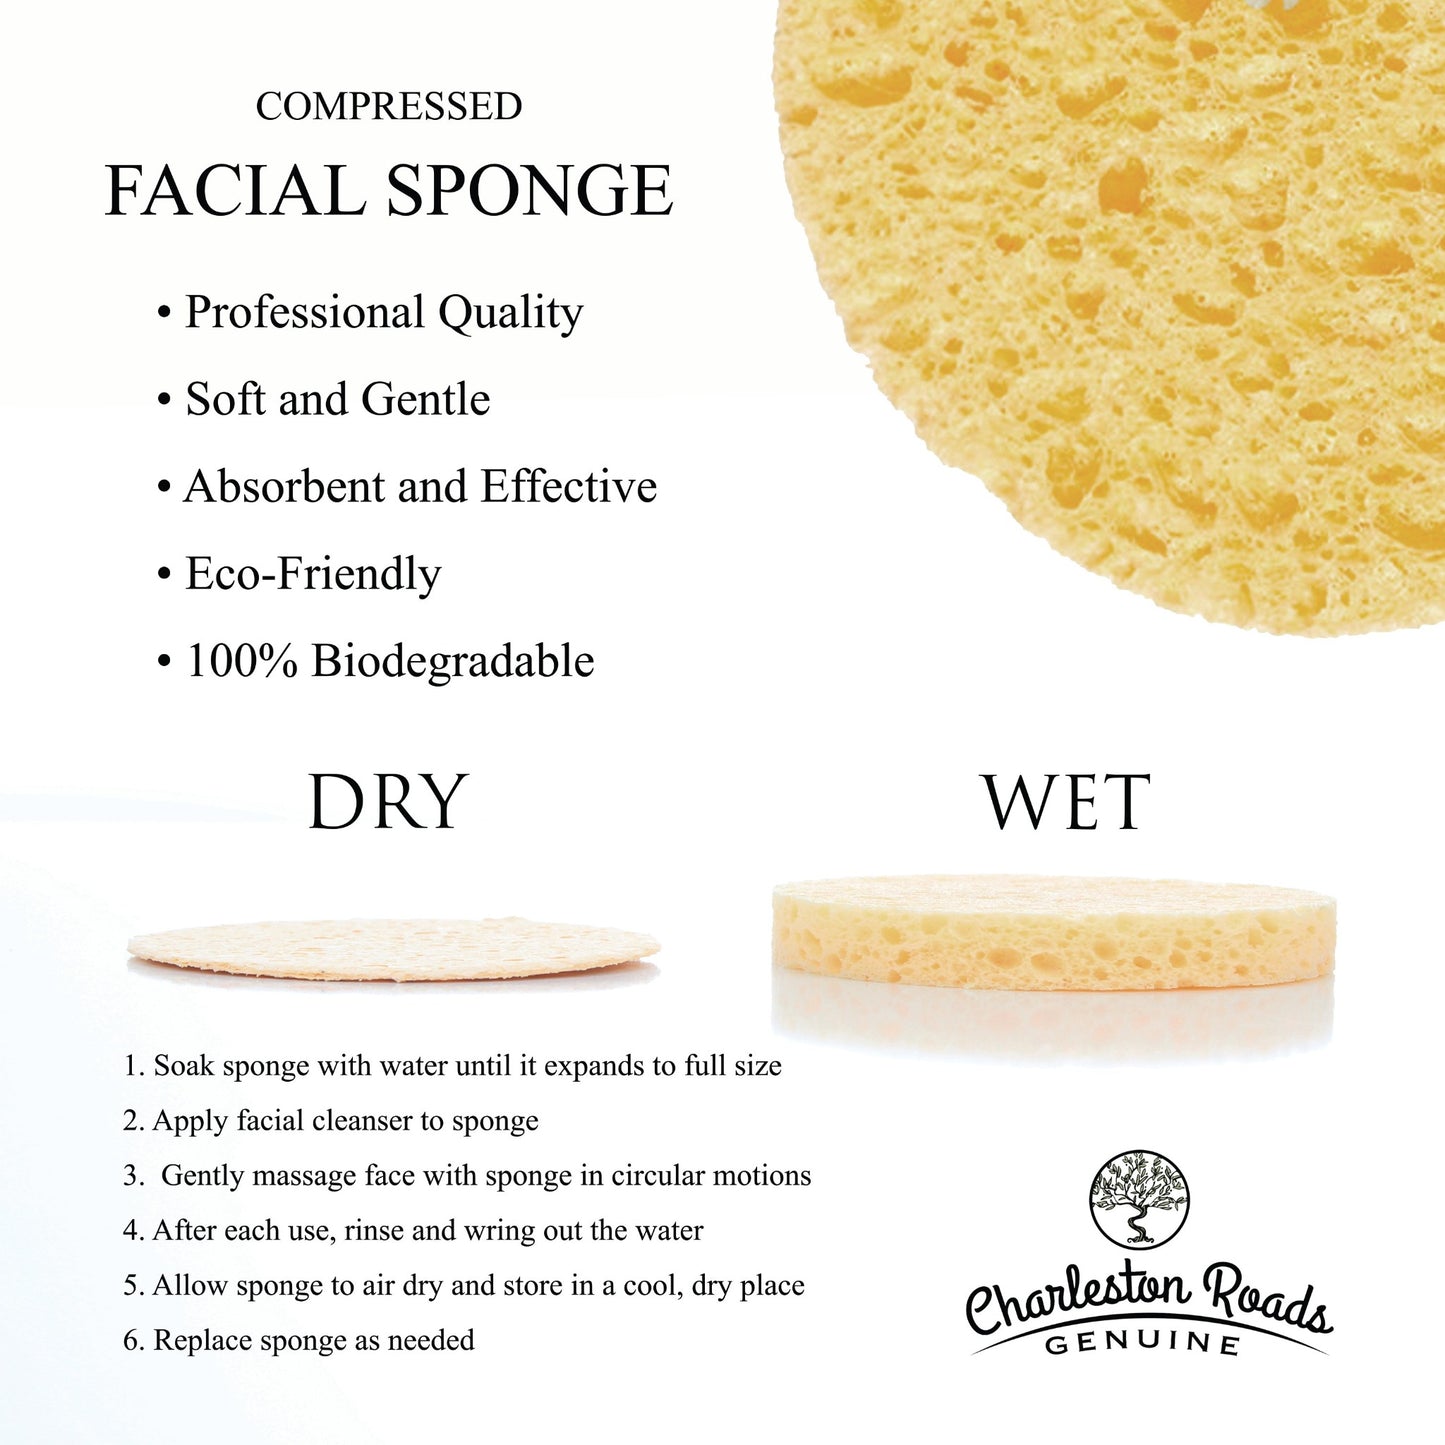 Yellow Compressed Facial Sponges